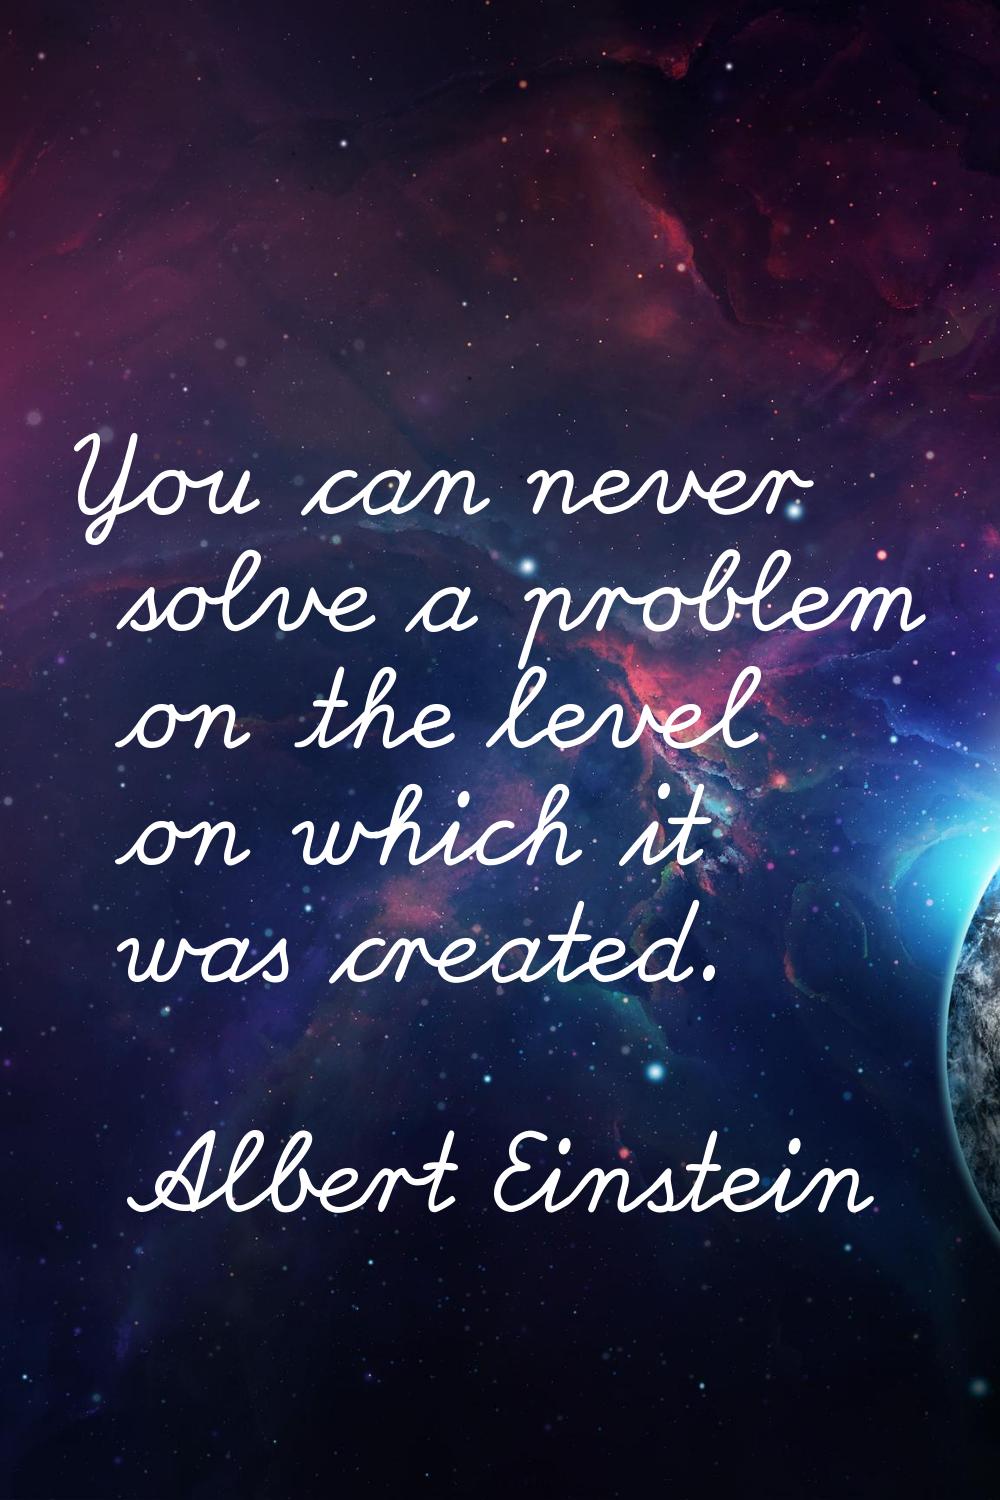 You can never solve a problem on the level on which it was created.